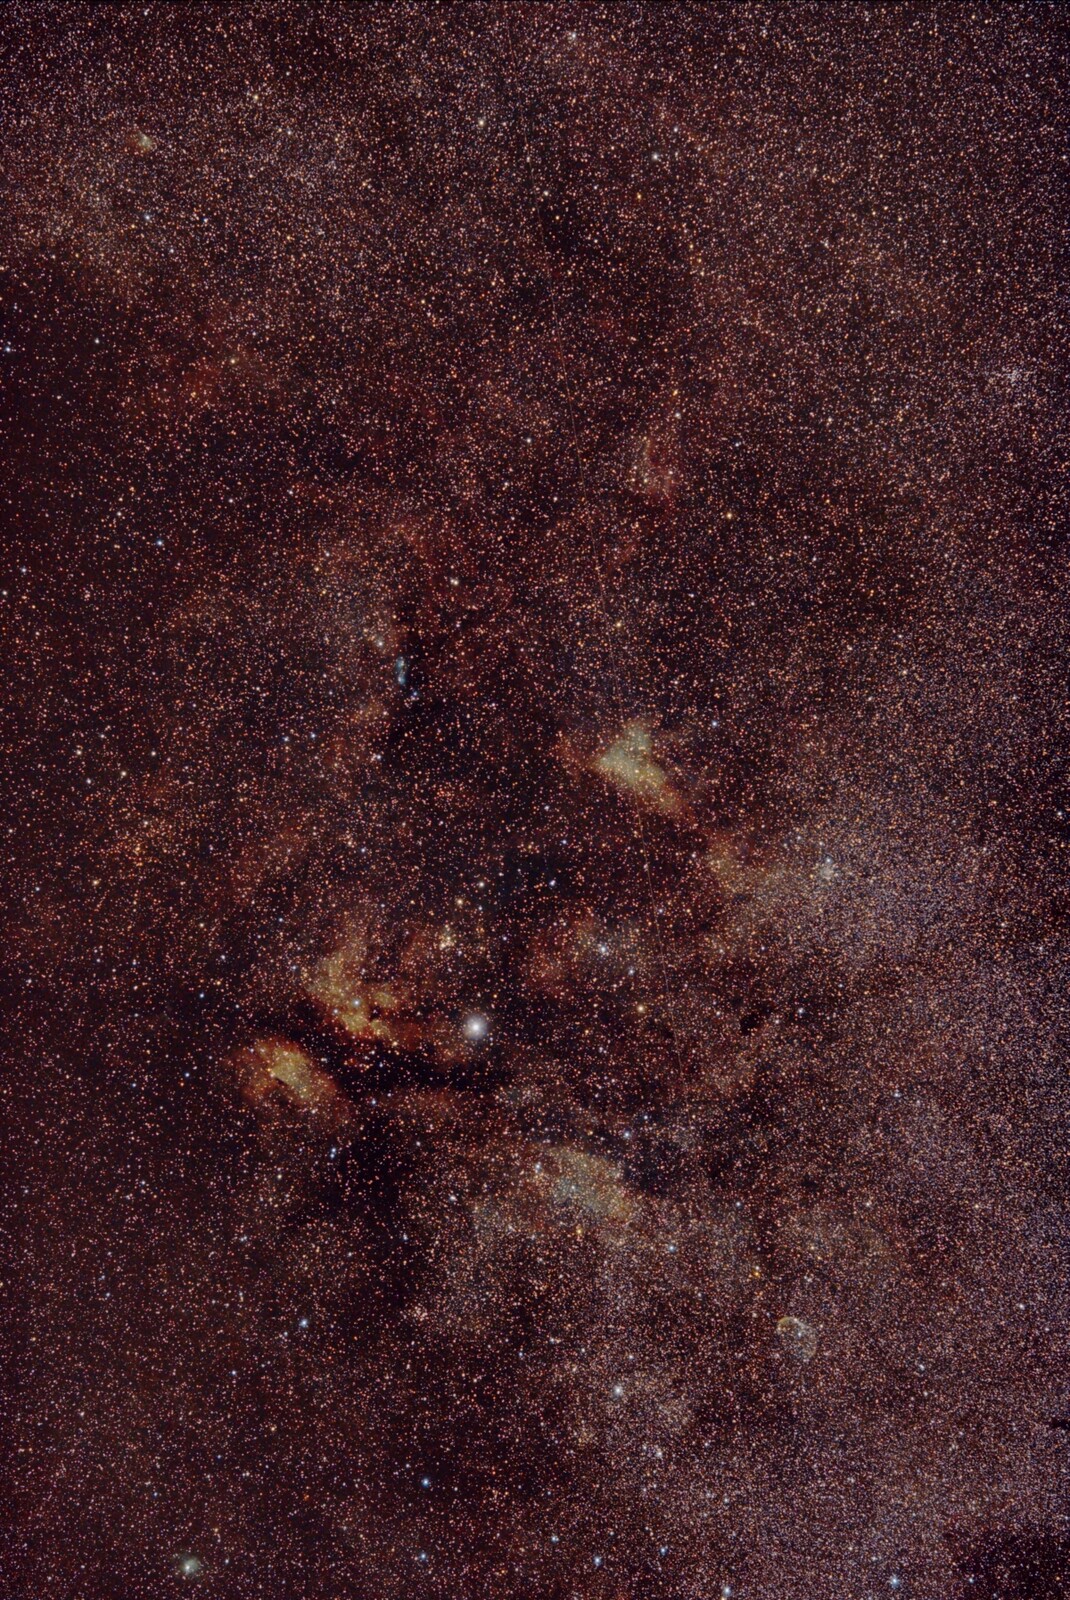 Sadr widefield with Samyang 135mm from September 18th, 2022; mod. Canon 760d; 5x1min; dark denmark;